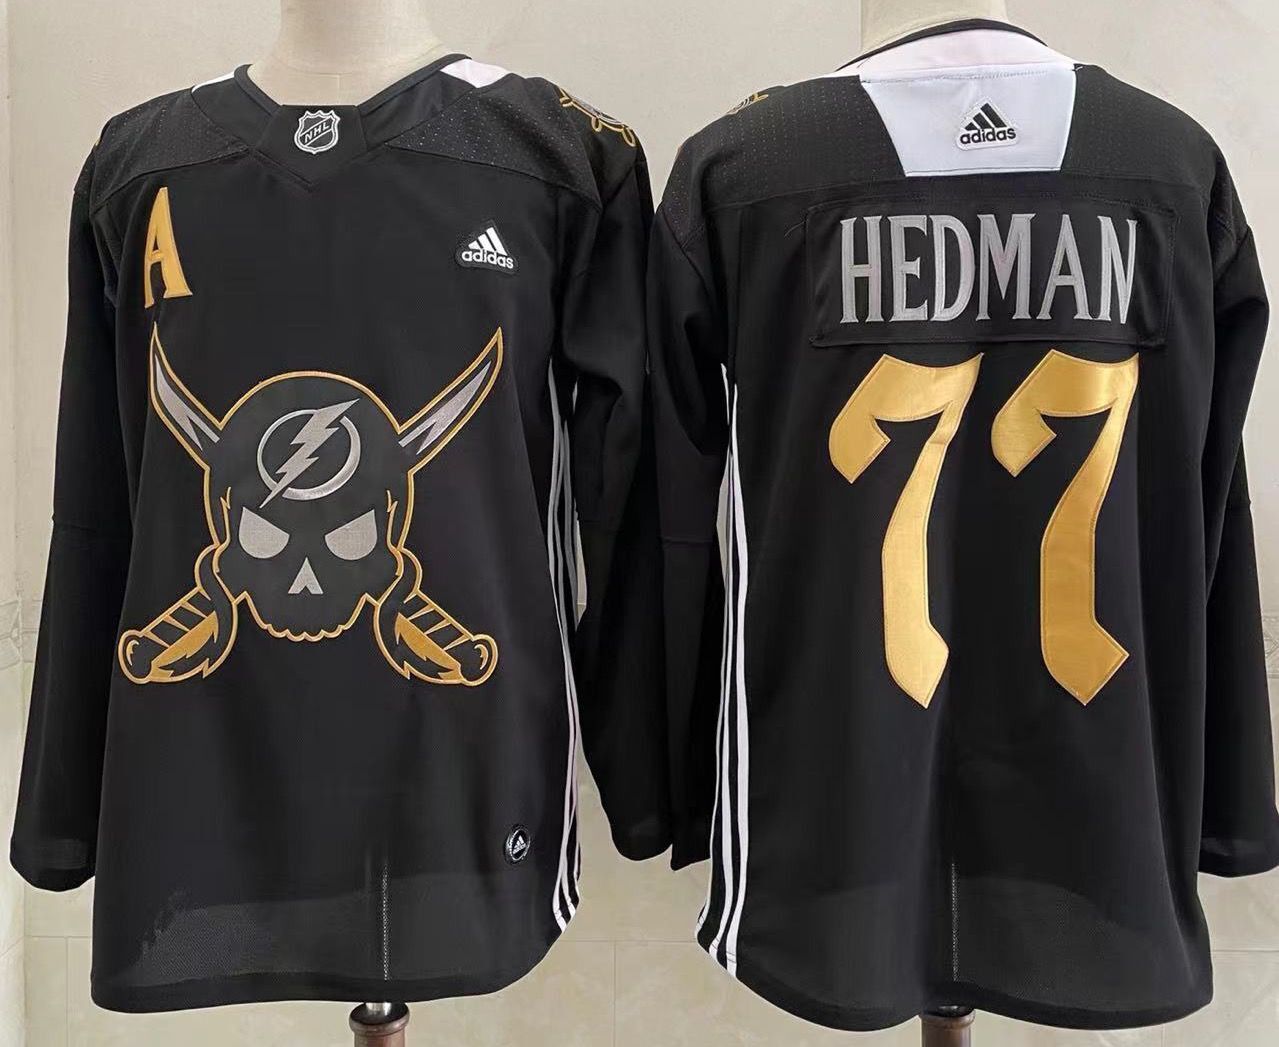 Men's Tampa Bay Lightning #77 Victor Hedman Black Pirate Themed Warmup Authentic Jersey